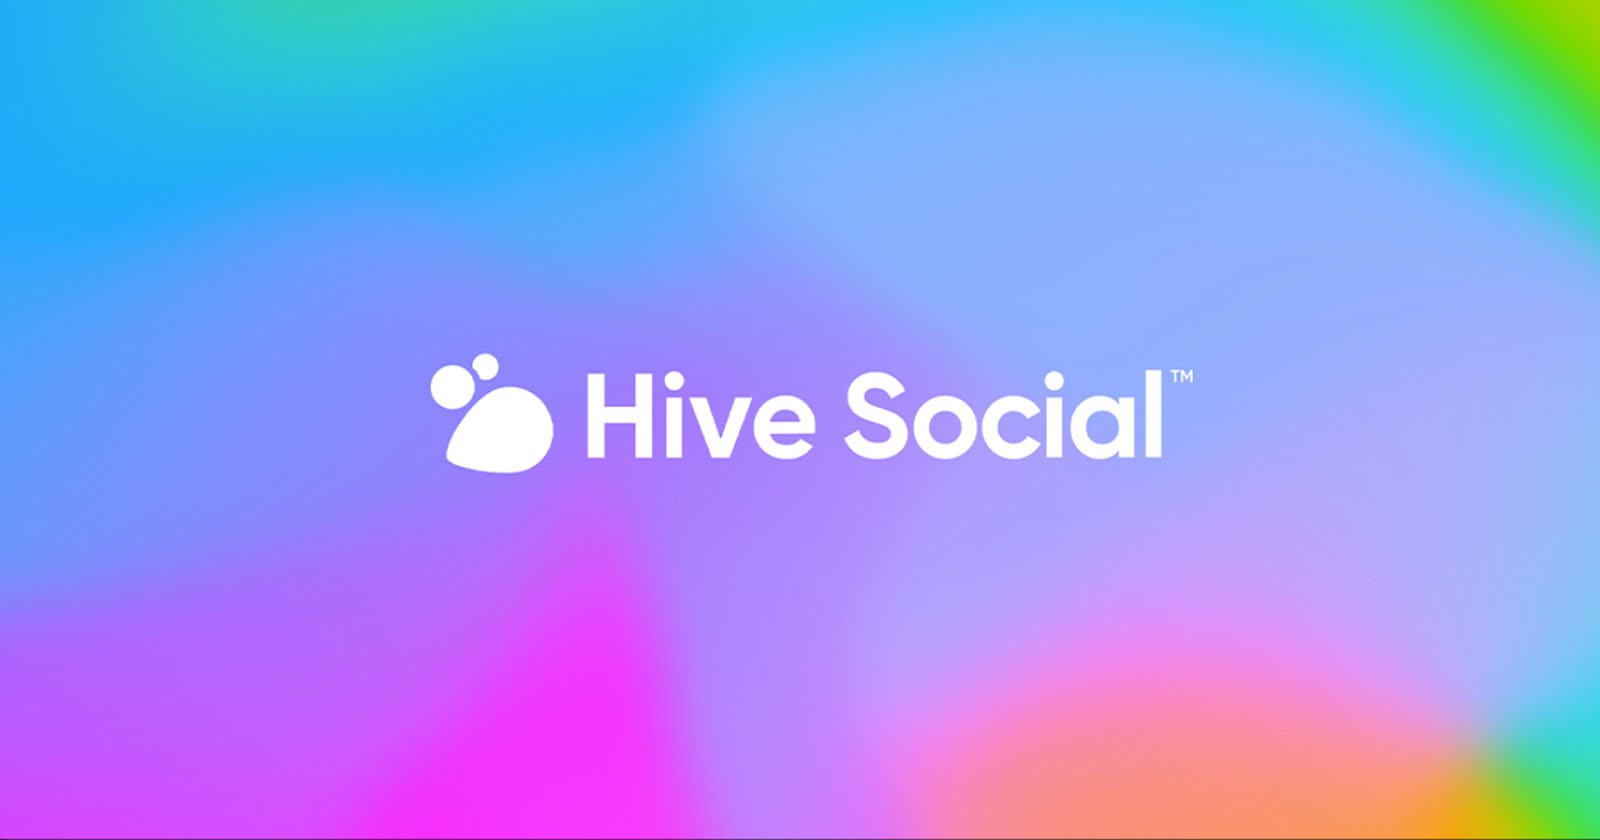  hive social back online two weeks after security 